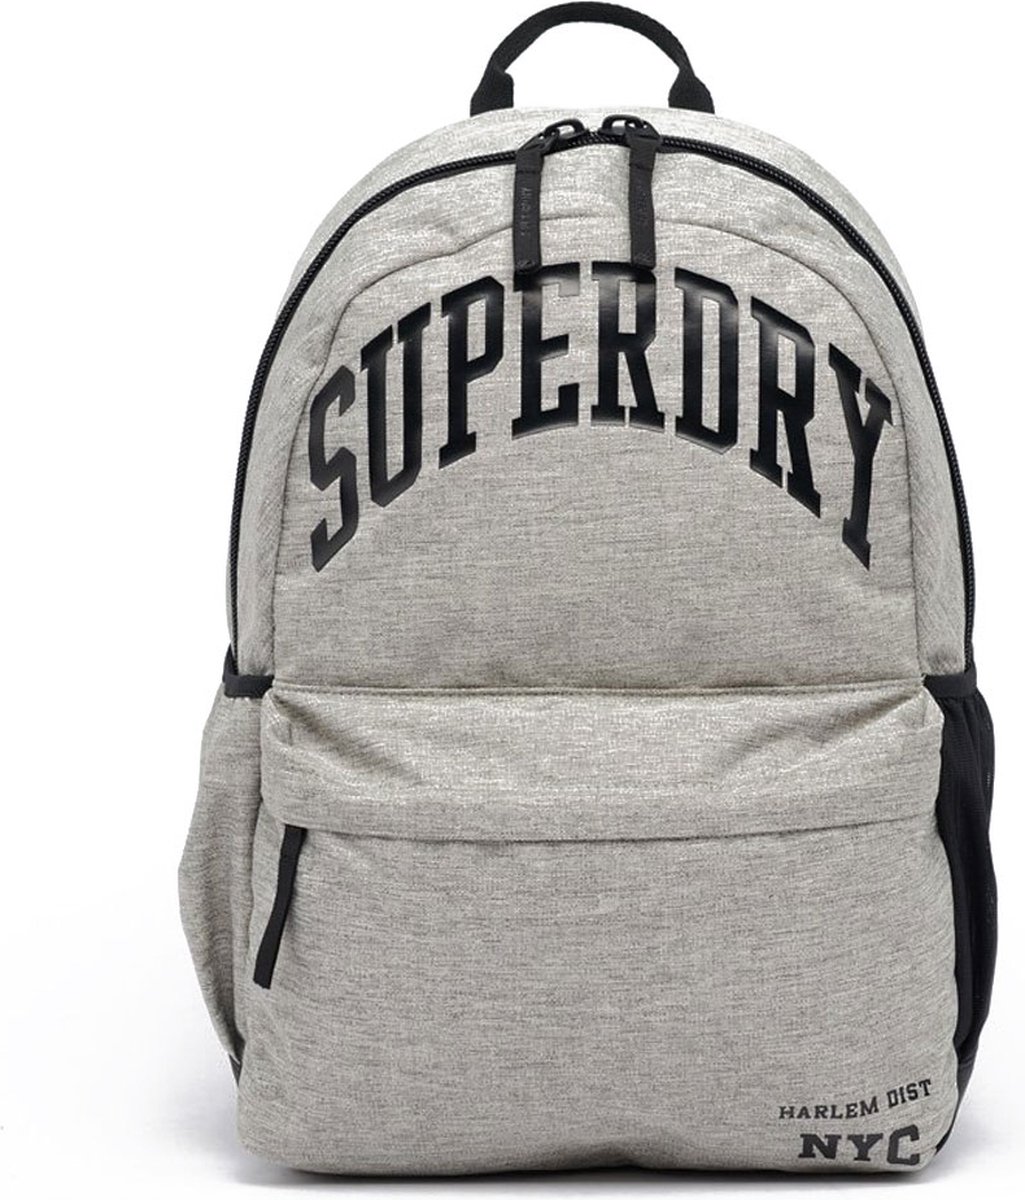 Superdry Montana Arch Backpack Light Grey Marl